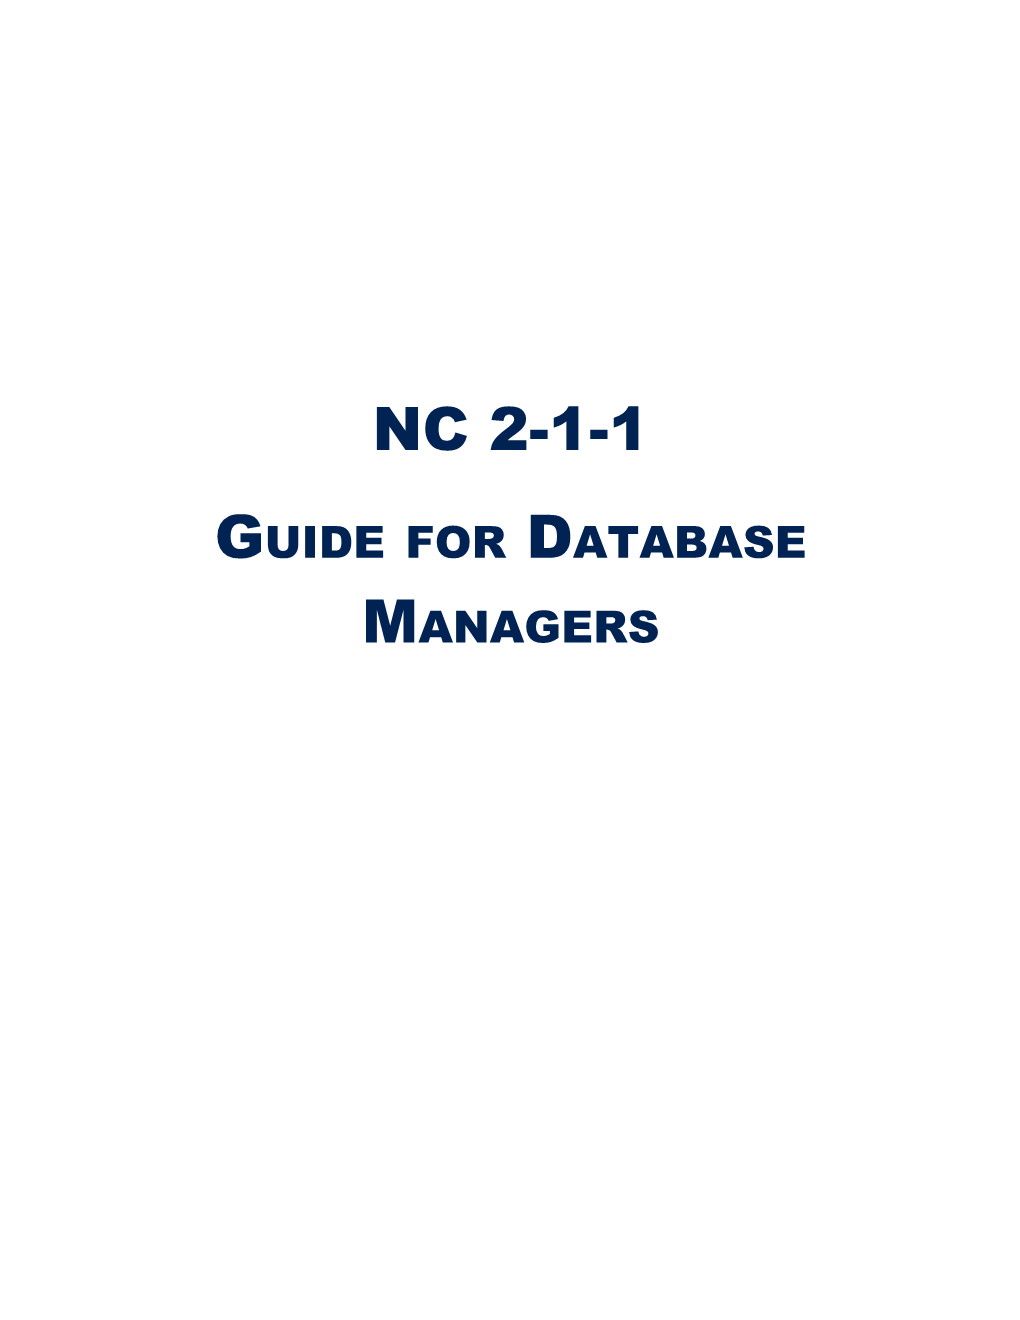 NC 2-1-1 Guide for Database Managers